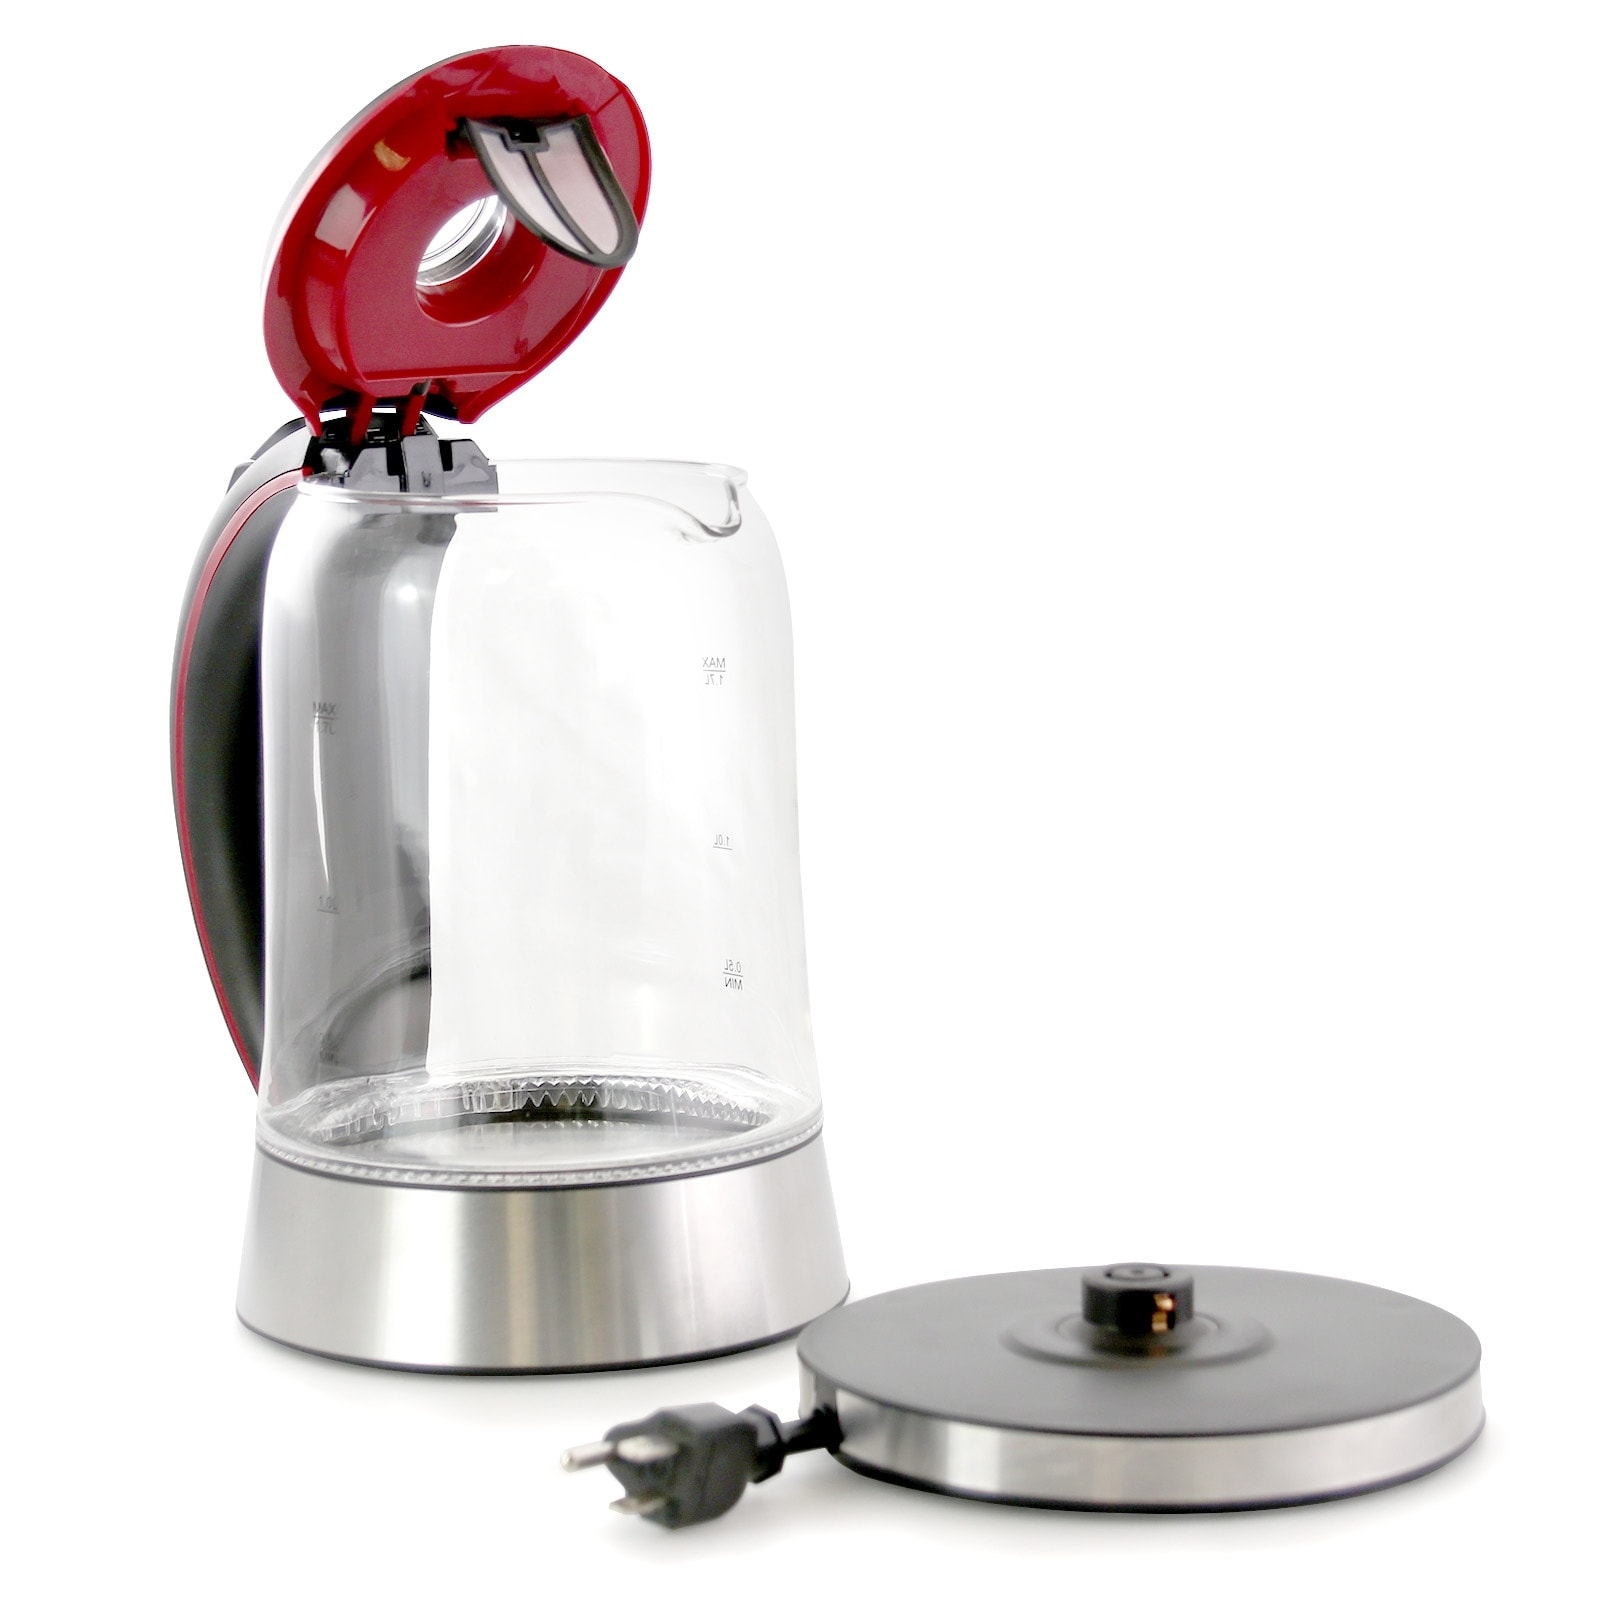 Better Chef 1.7 L Cordless Electric Glass and Stainless Steel Tea Kettle